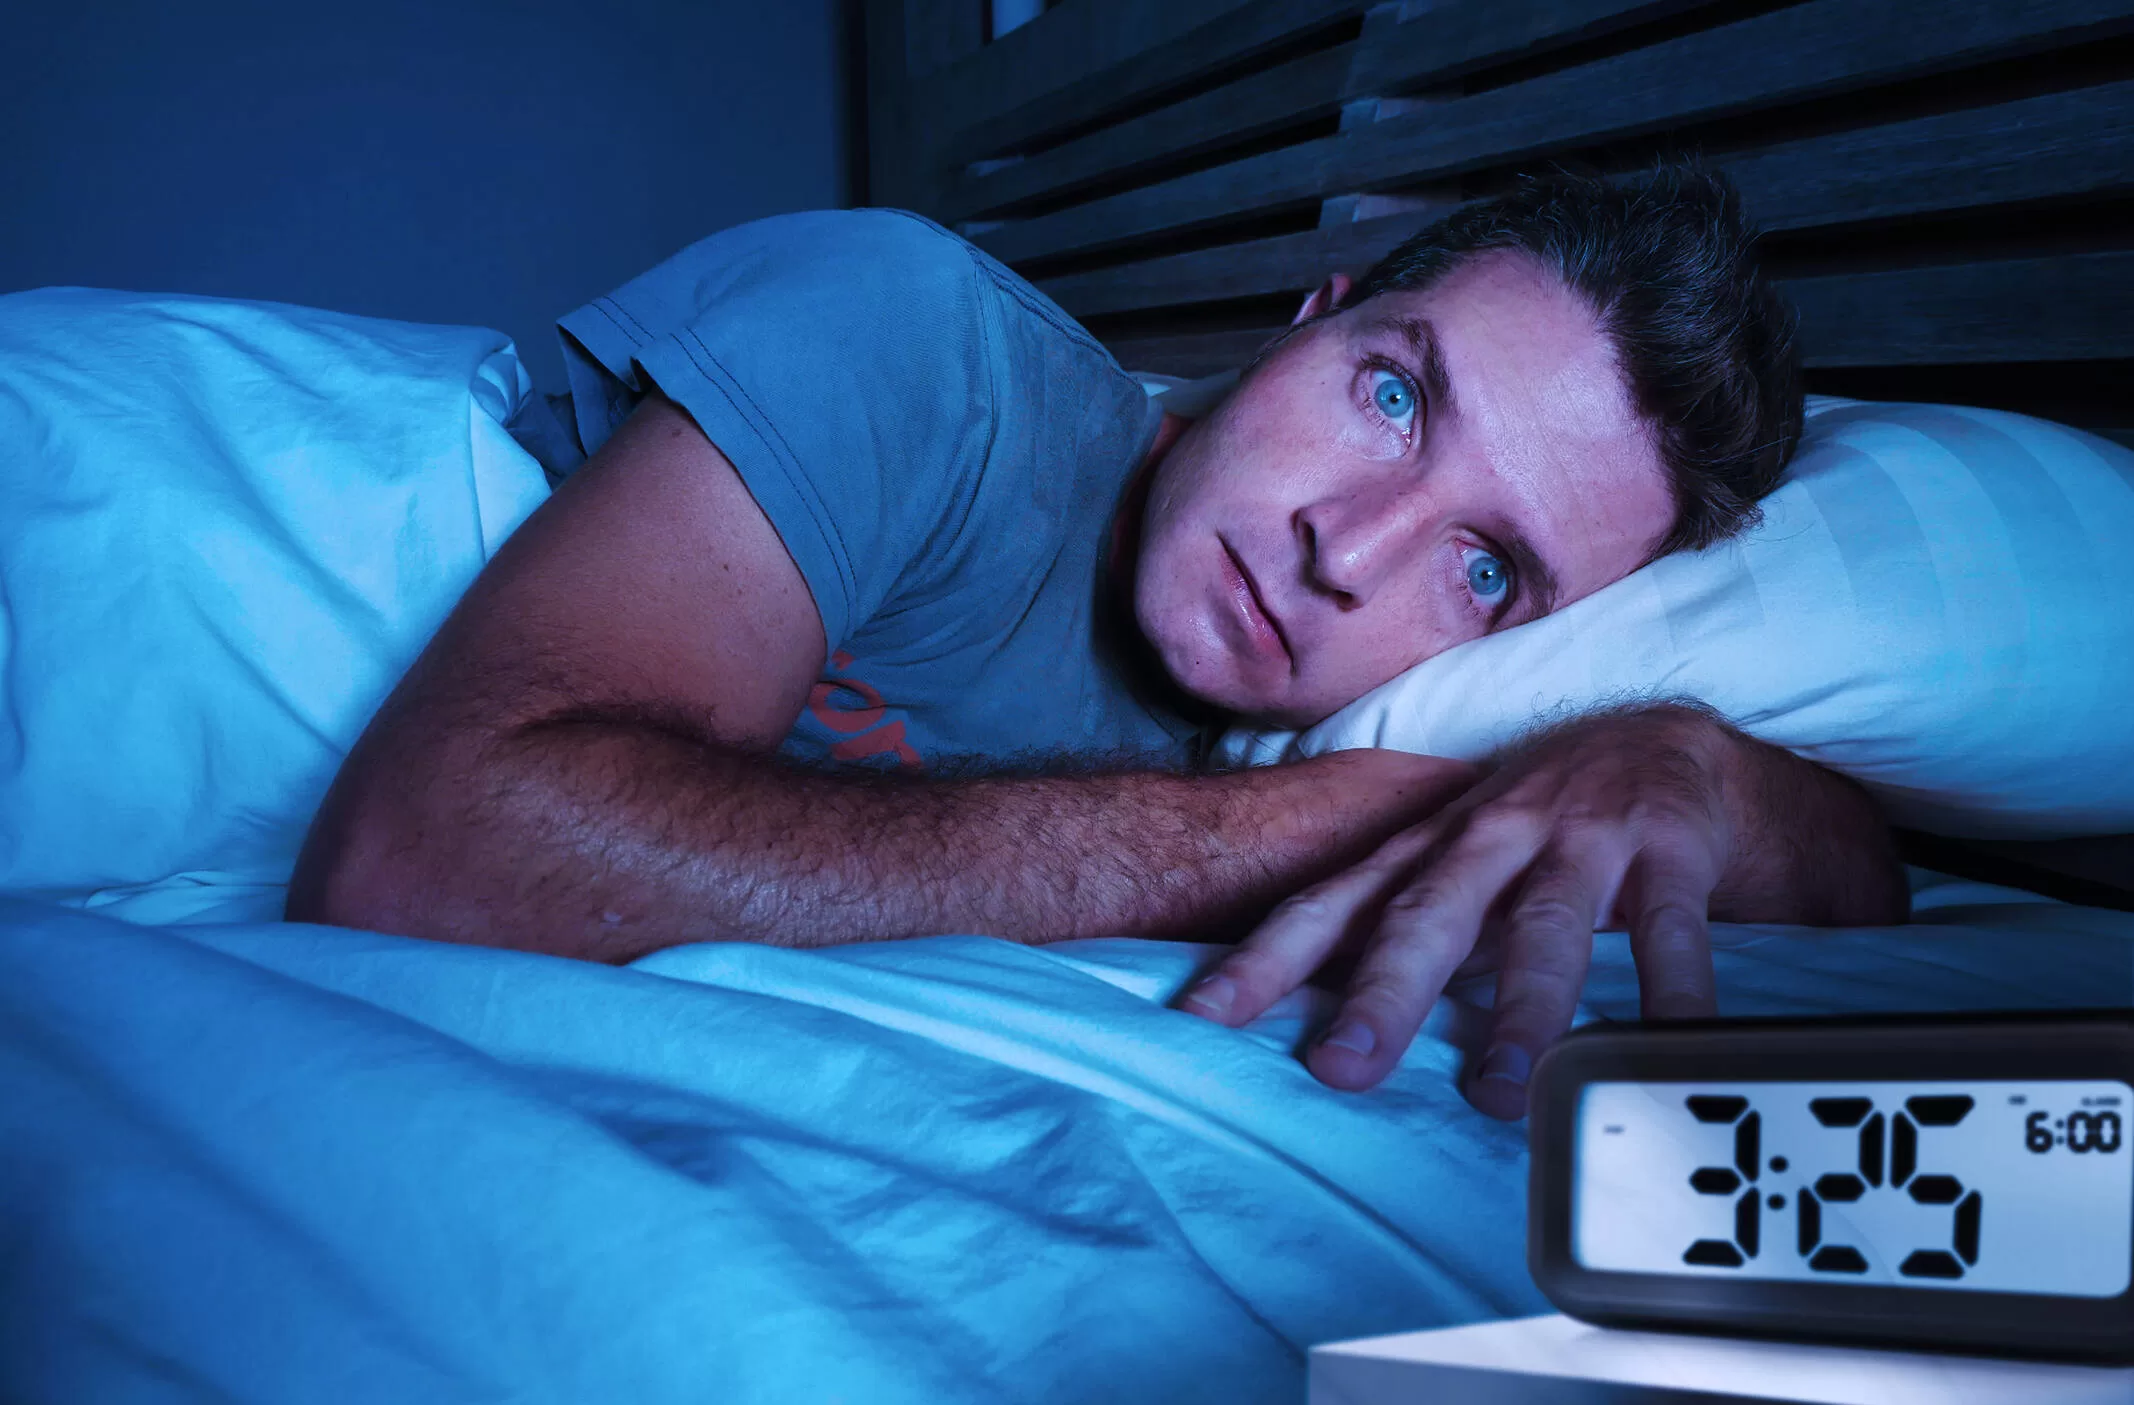 What does it mean to wake up at 3 am, according to numerology?
